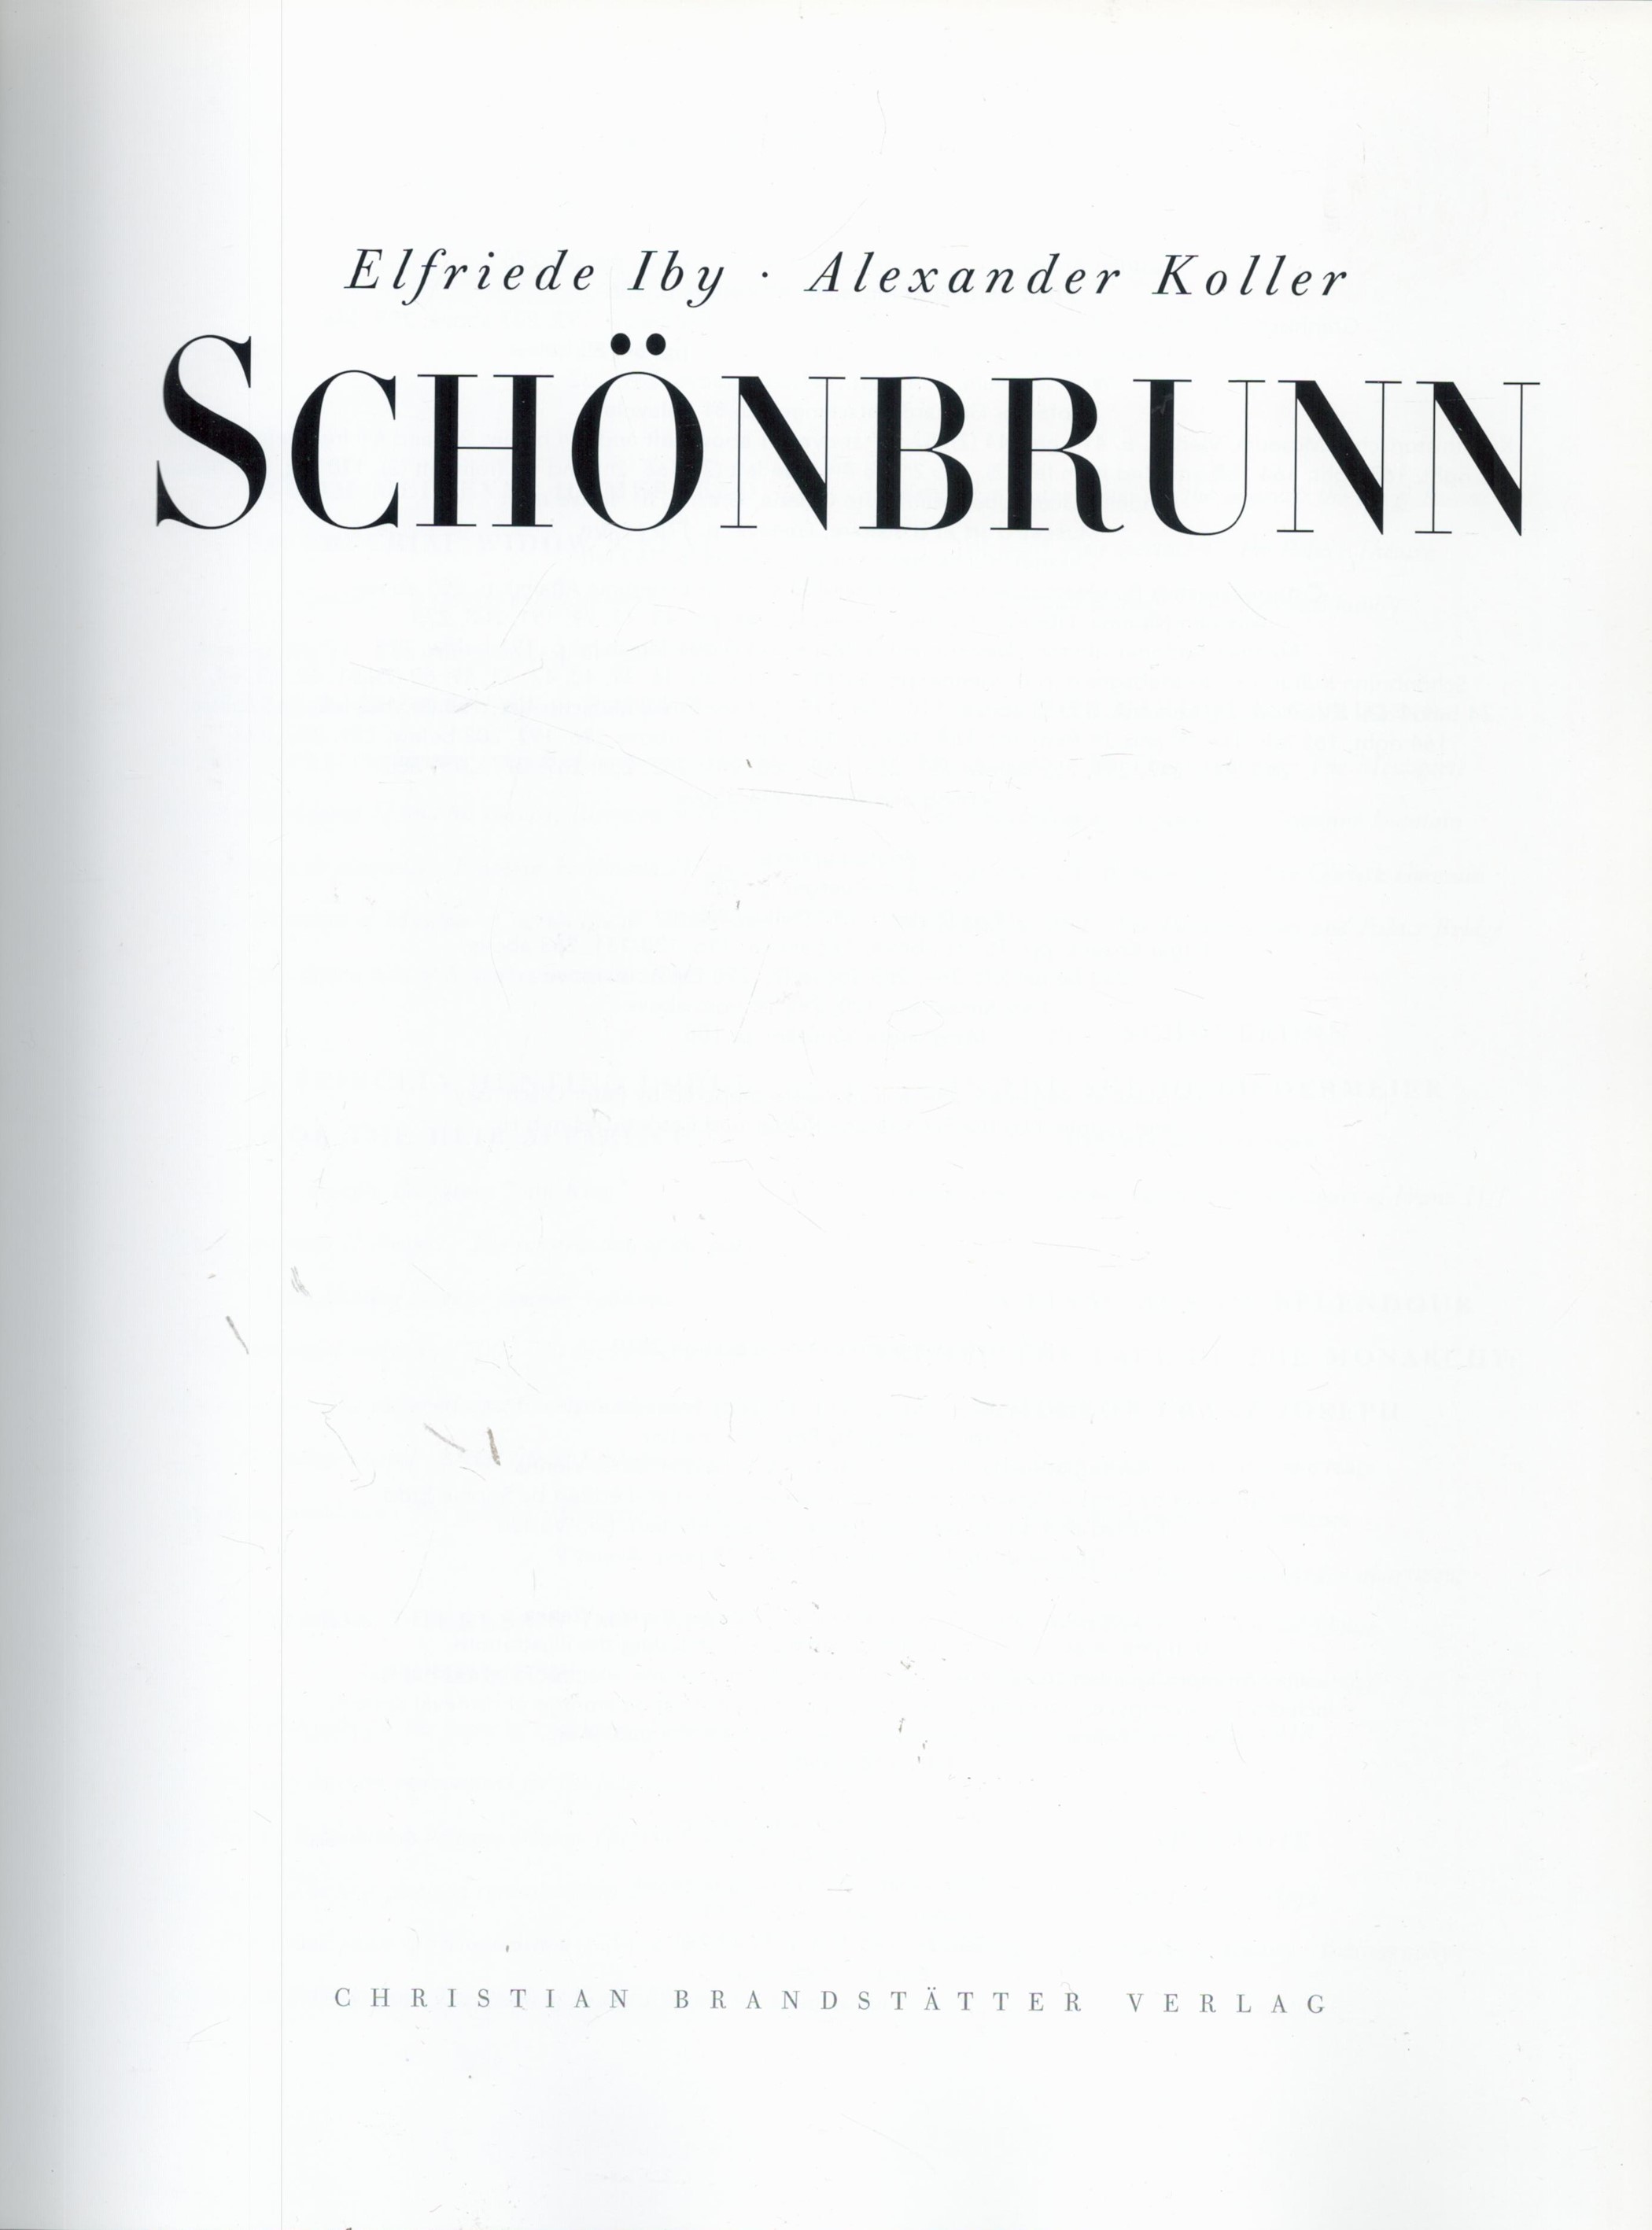 Schonbrunn by Elfriede Iby and Alexander Koller 2010 New Revised Edition Hardback Book with 304 - Image 2 of 3